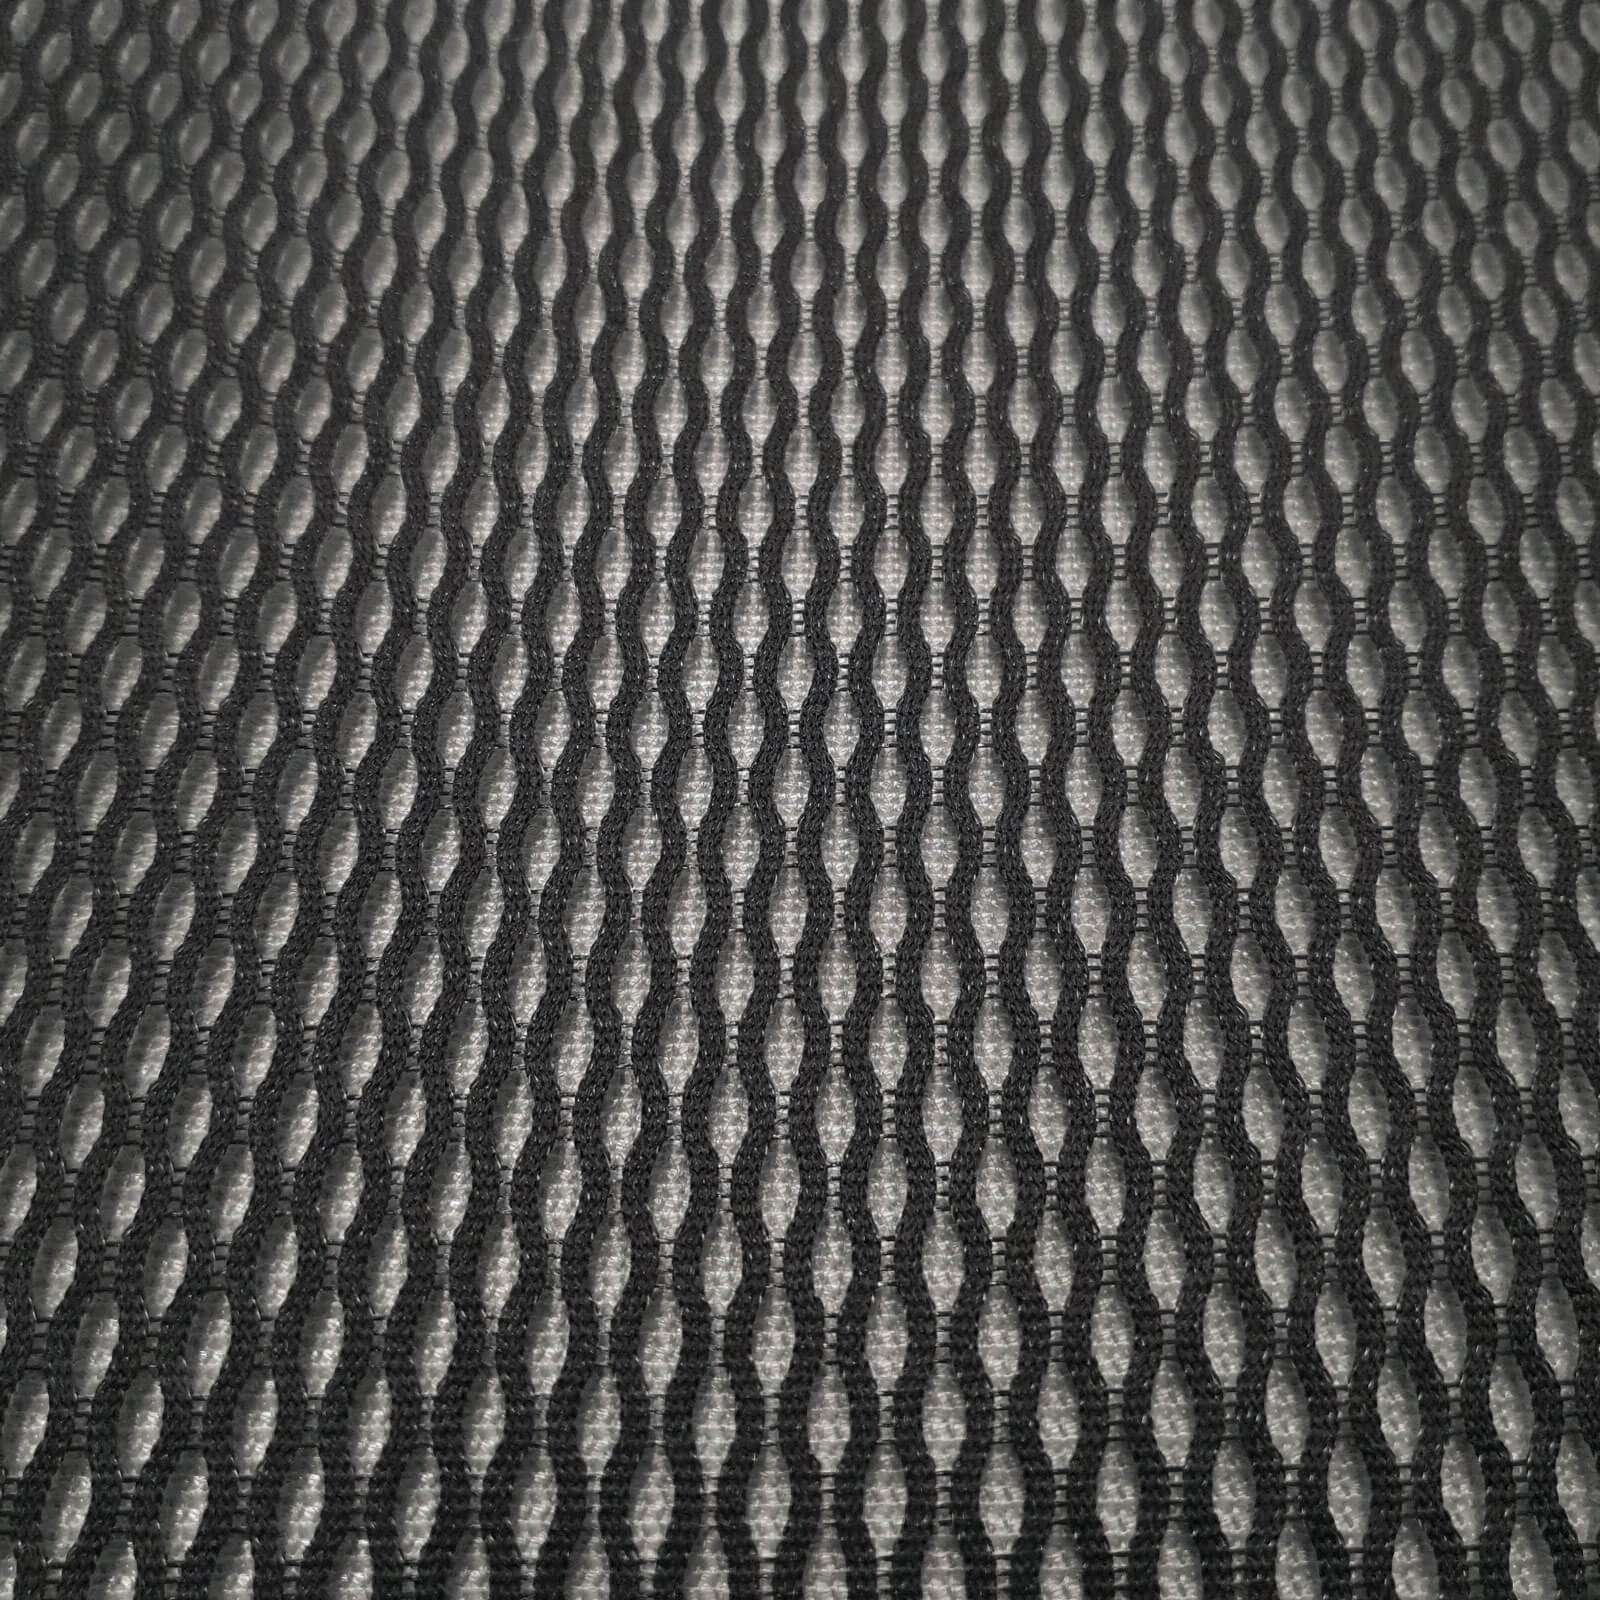  Breathable 3D Air Mesh Fabric,Light 3 Layers Sandwich Spacer Mesh  Fabric, Apply to DIY Craft,Upholstery,Home Applications,  Chair,Bags,Clothes,Shoes, Lining, 1yard/36x56,Sold by The Yard (Gray) :  Arts, Crafts & Sewing